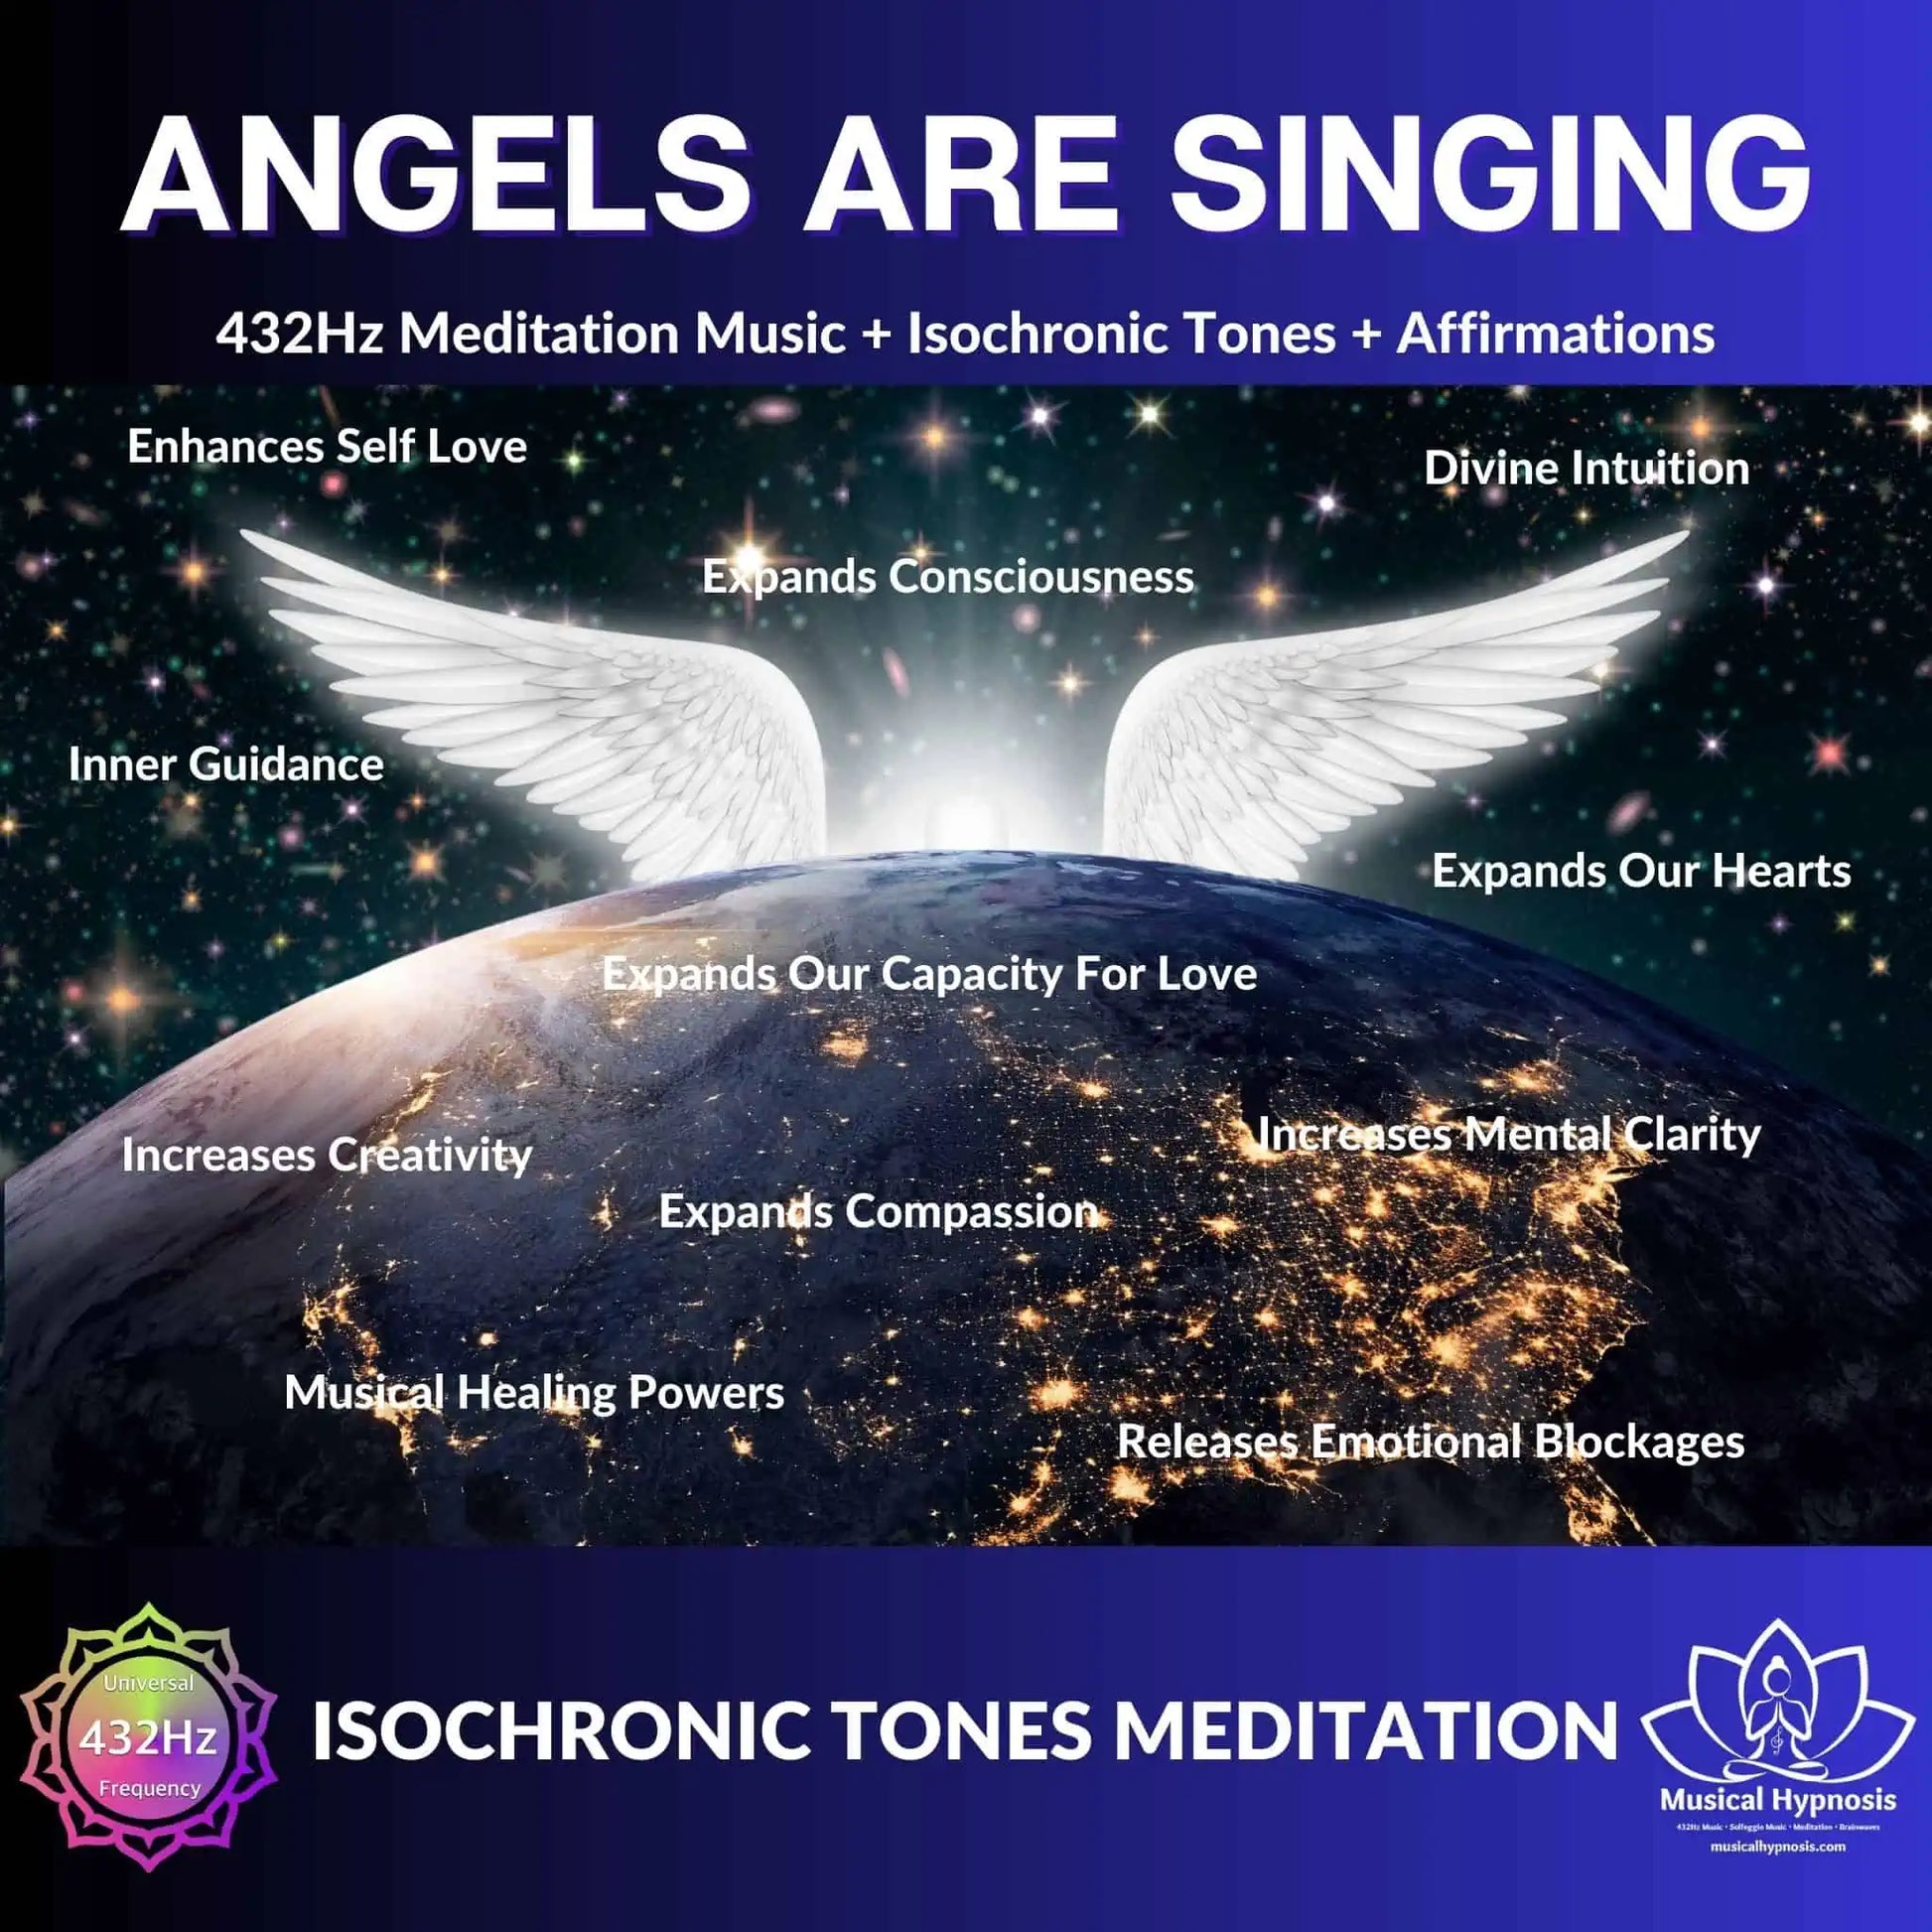 Angels Are Singing • 432Hz Isochronic Tones Meditation by Musical Hypnosis